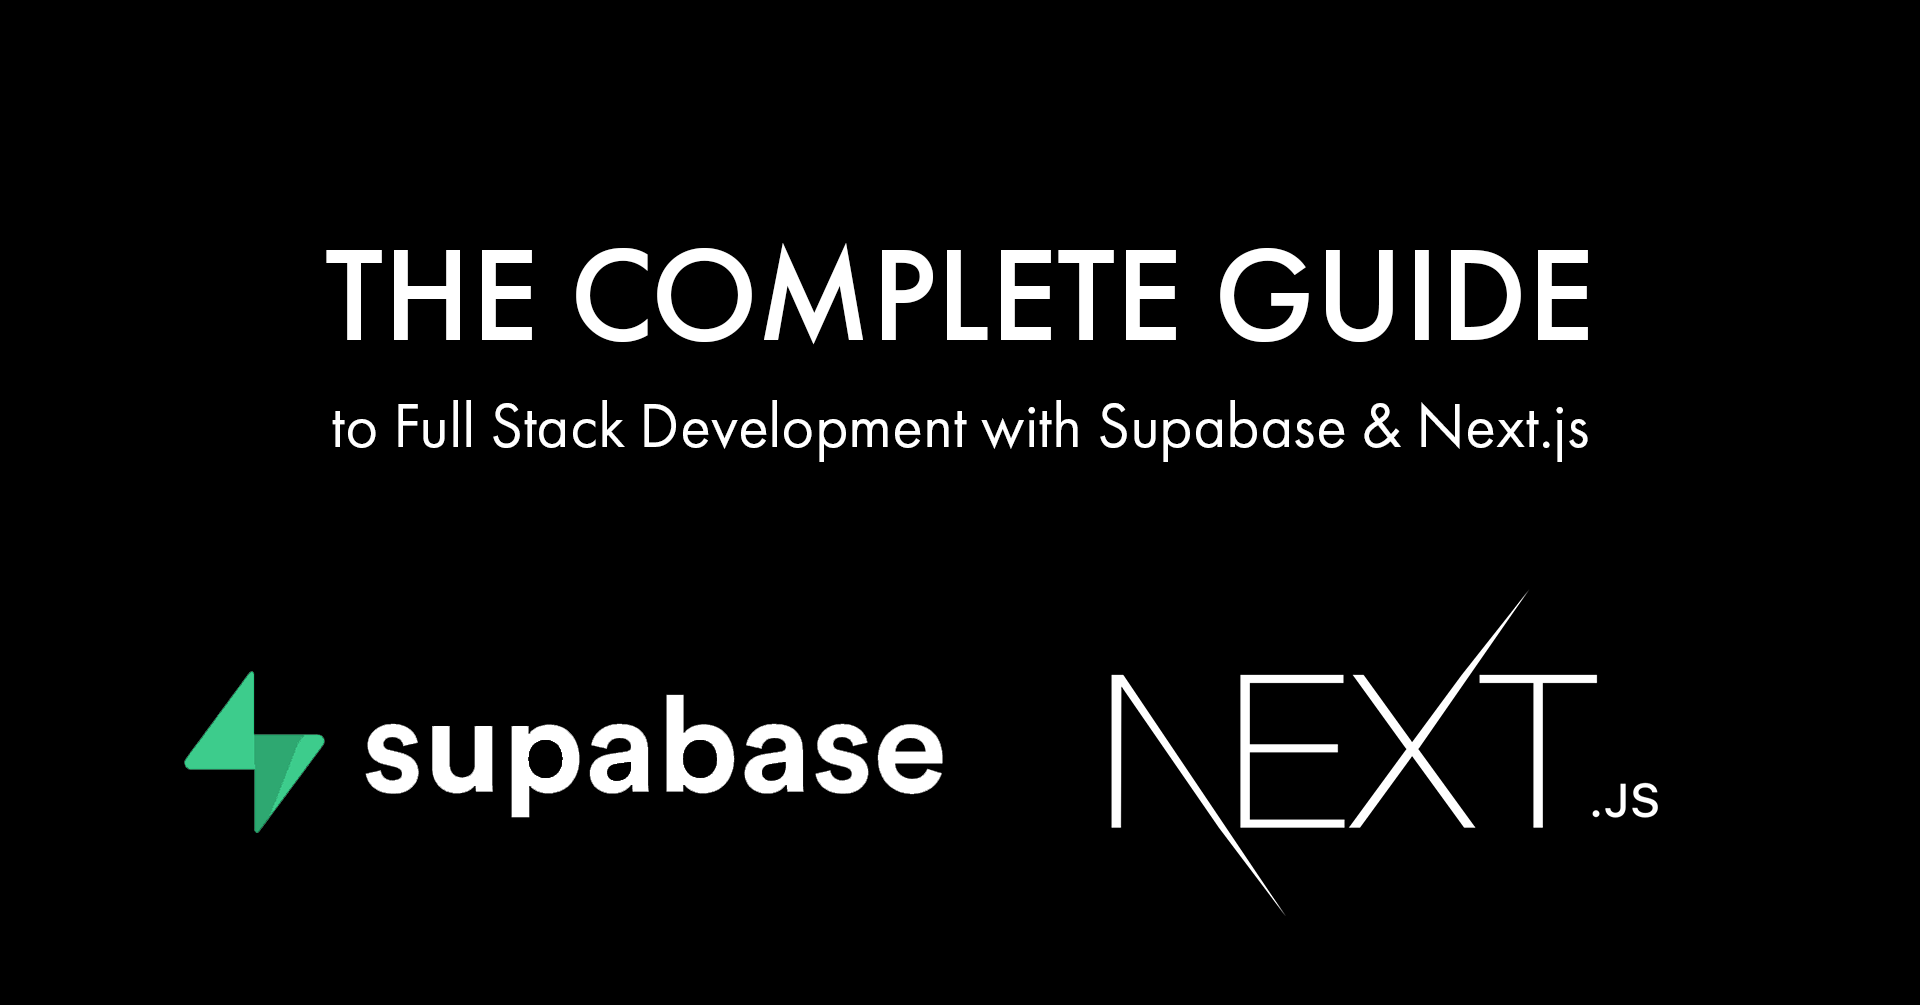 Full Stack Development with Next.js and Supabase – The Complete Guide